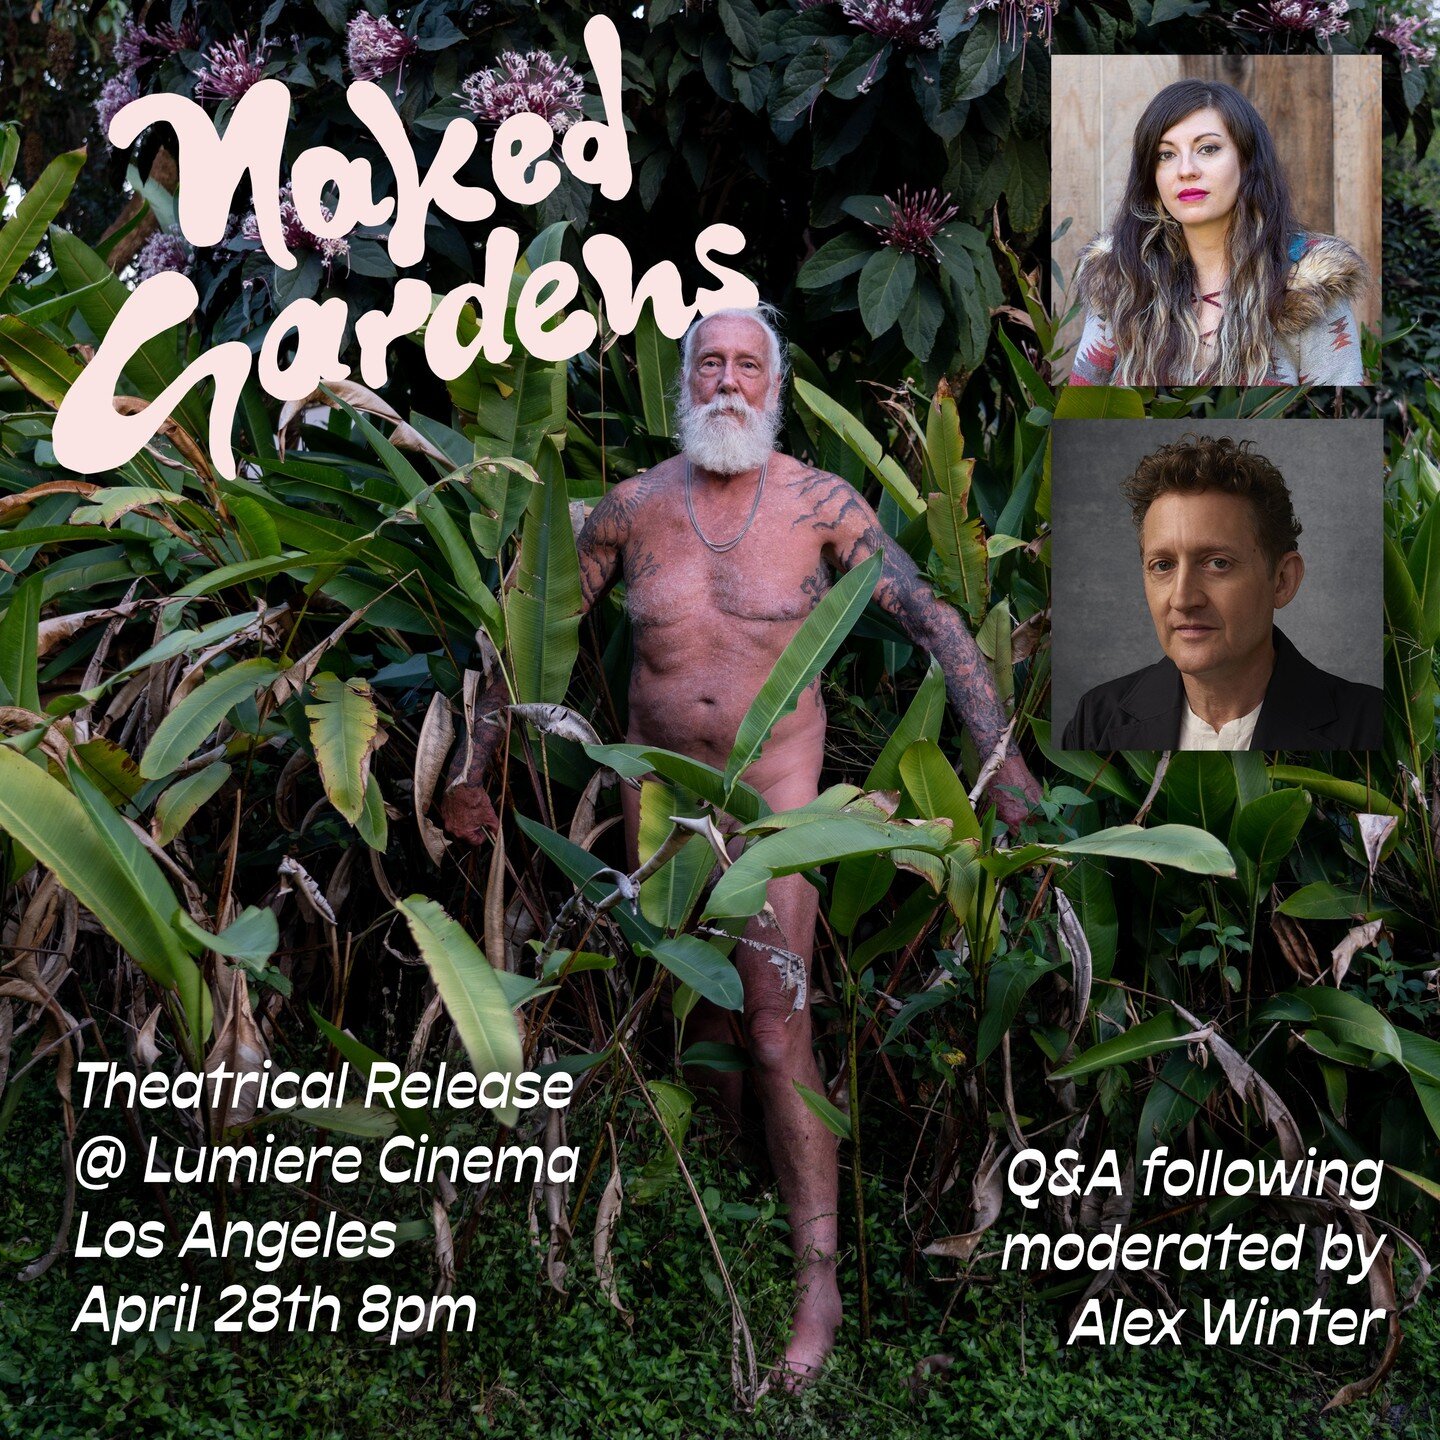 We're kickstarting the Naked Gardens theater run at the @lumierecinemala in Los Angeles with special guests at our first two screenings. On Friday 4/28 at 8pm, join us for a post screening discussion with director Ivete Lucas and most talented filmma